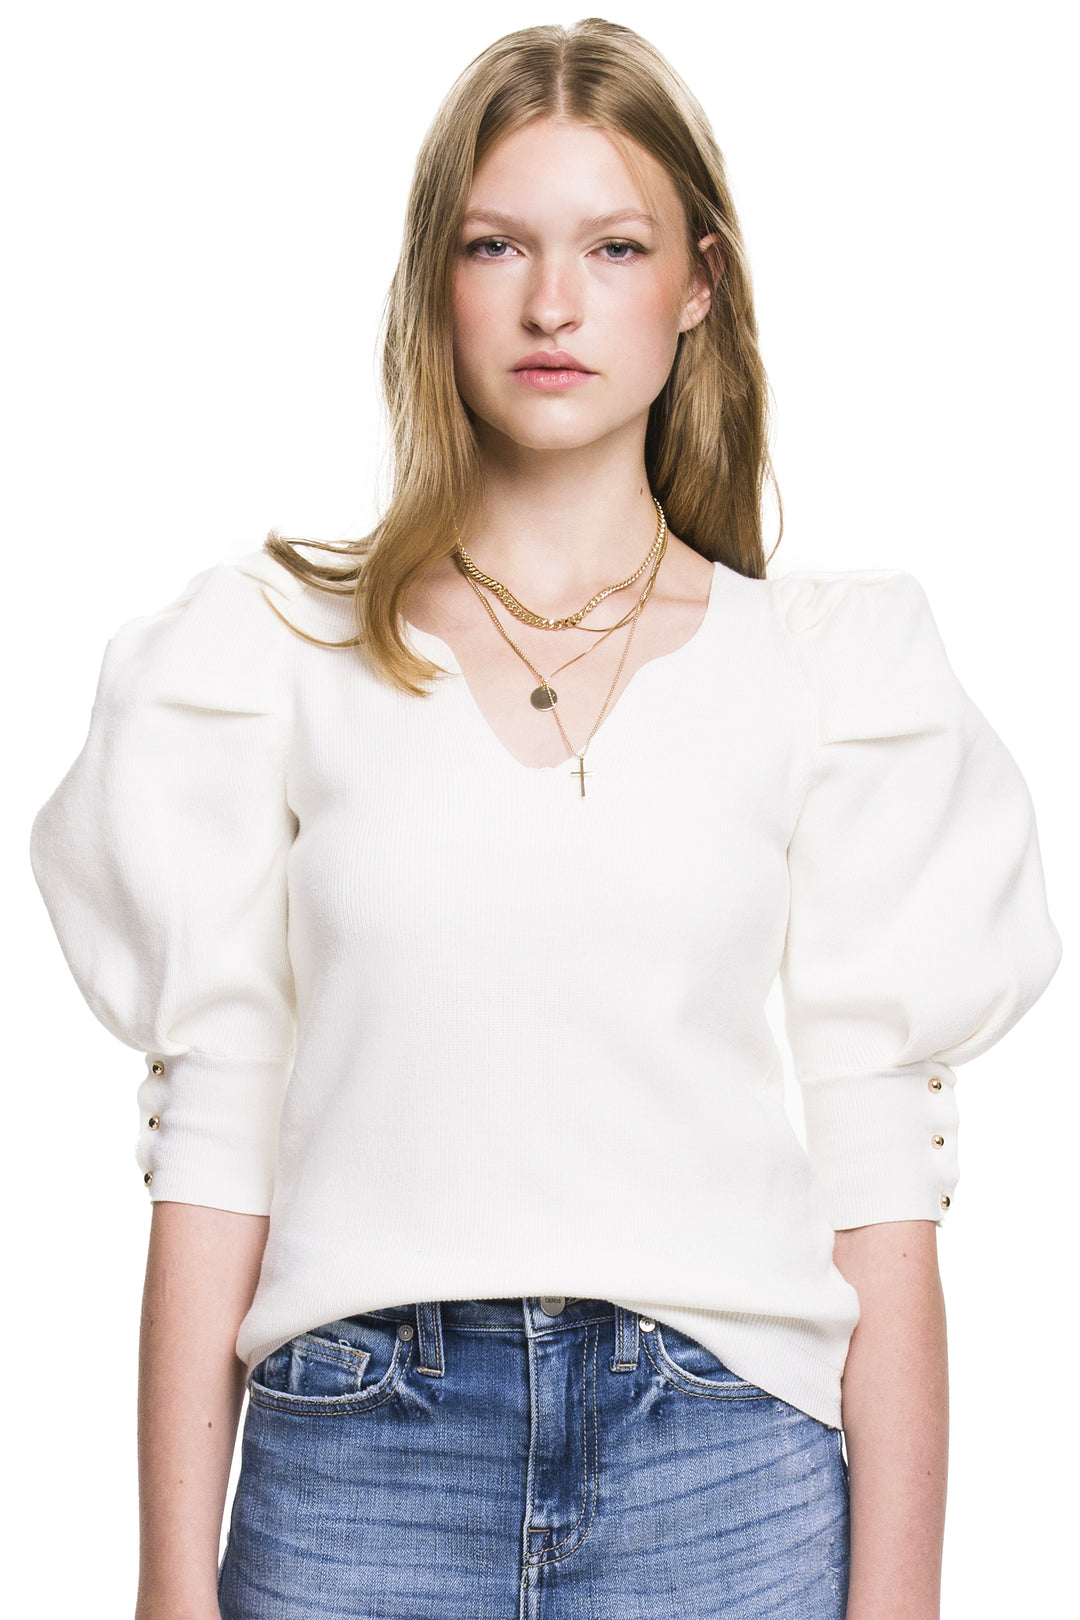 Cream Puff Short Sleeve Sweater - Expressive Collective CO.